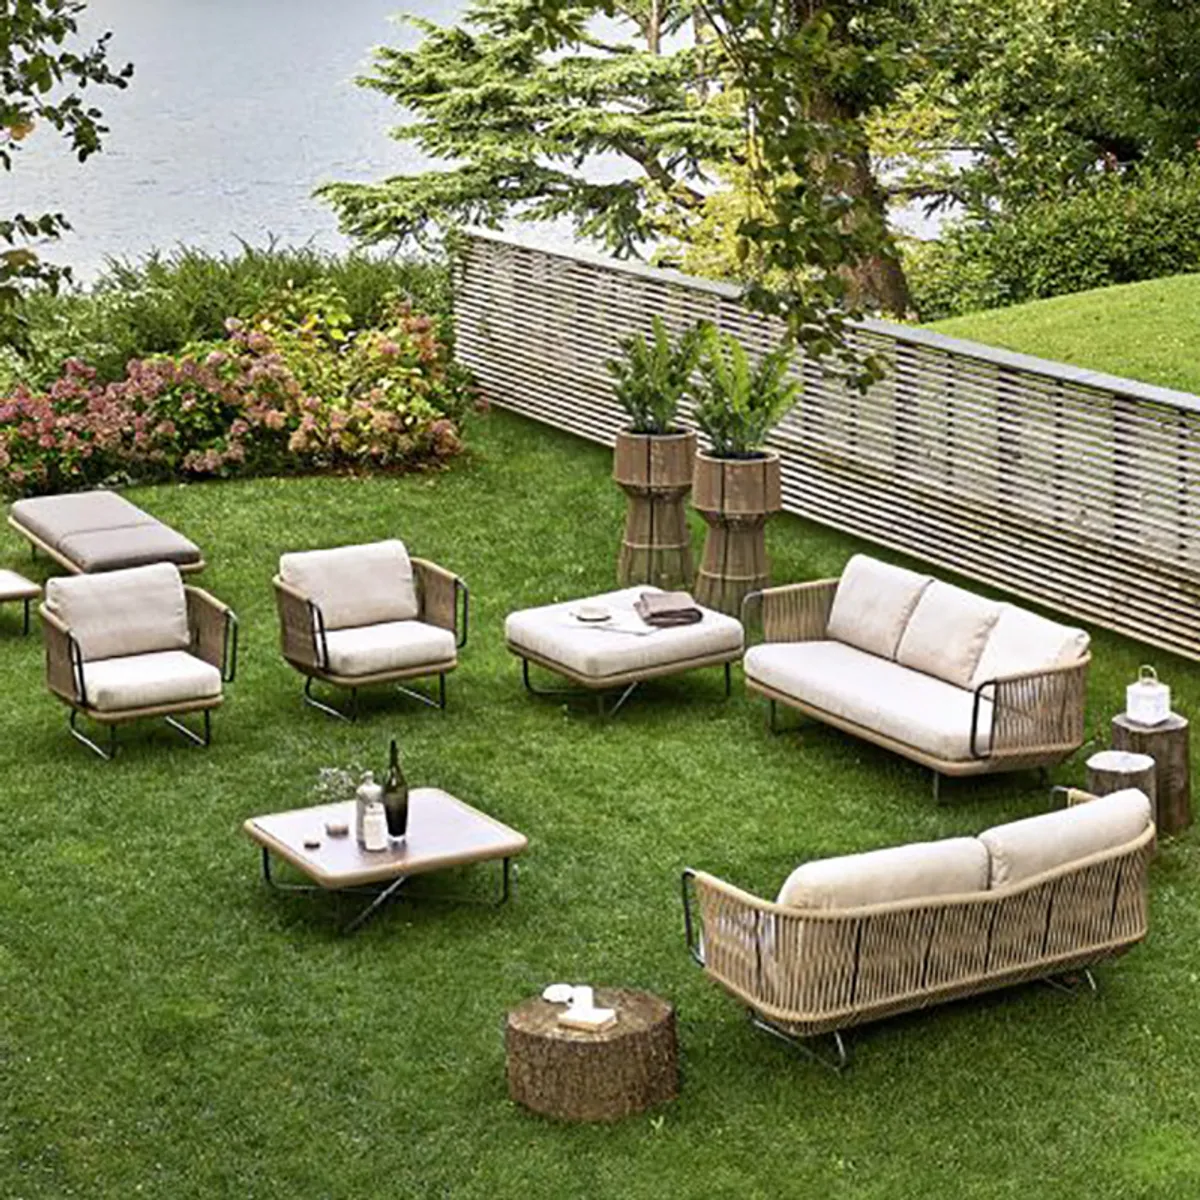 Babylon Collection Of Outdoor Seating For Hotel Gardens And Resort Patio Areas Insideoutcontracts 020